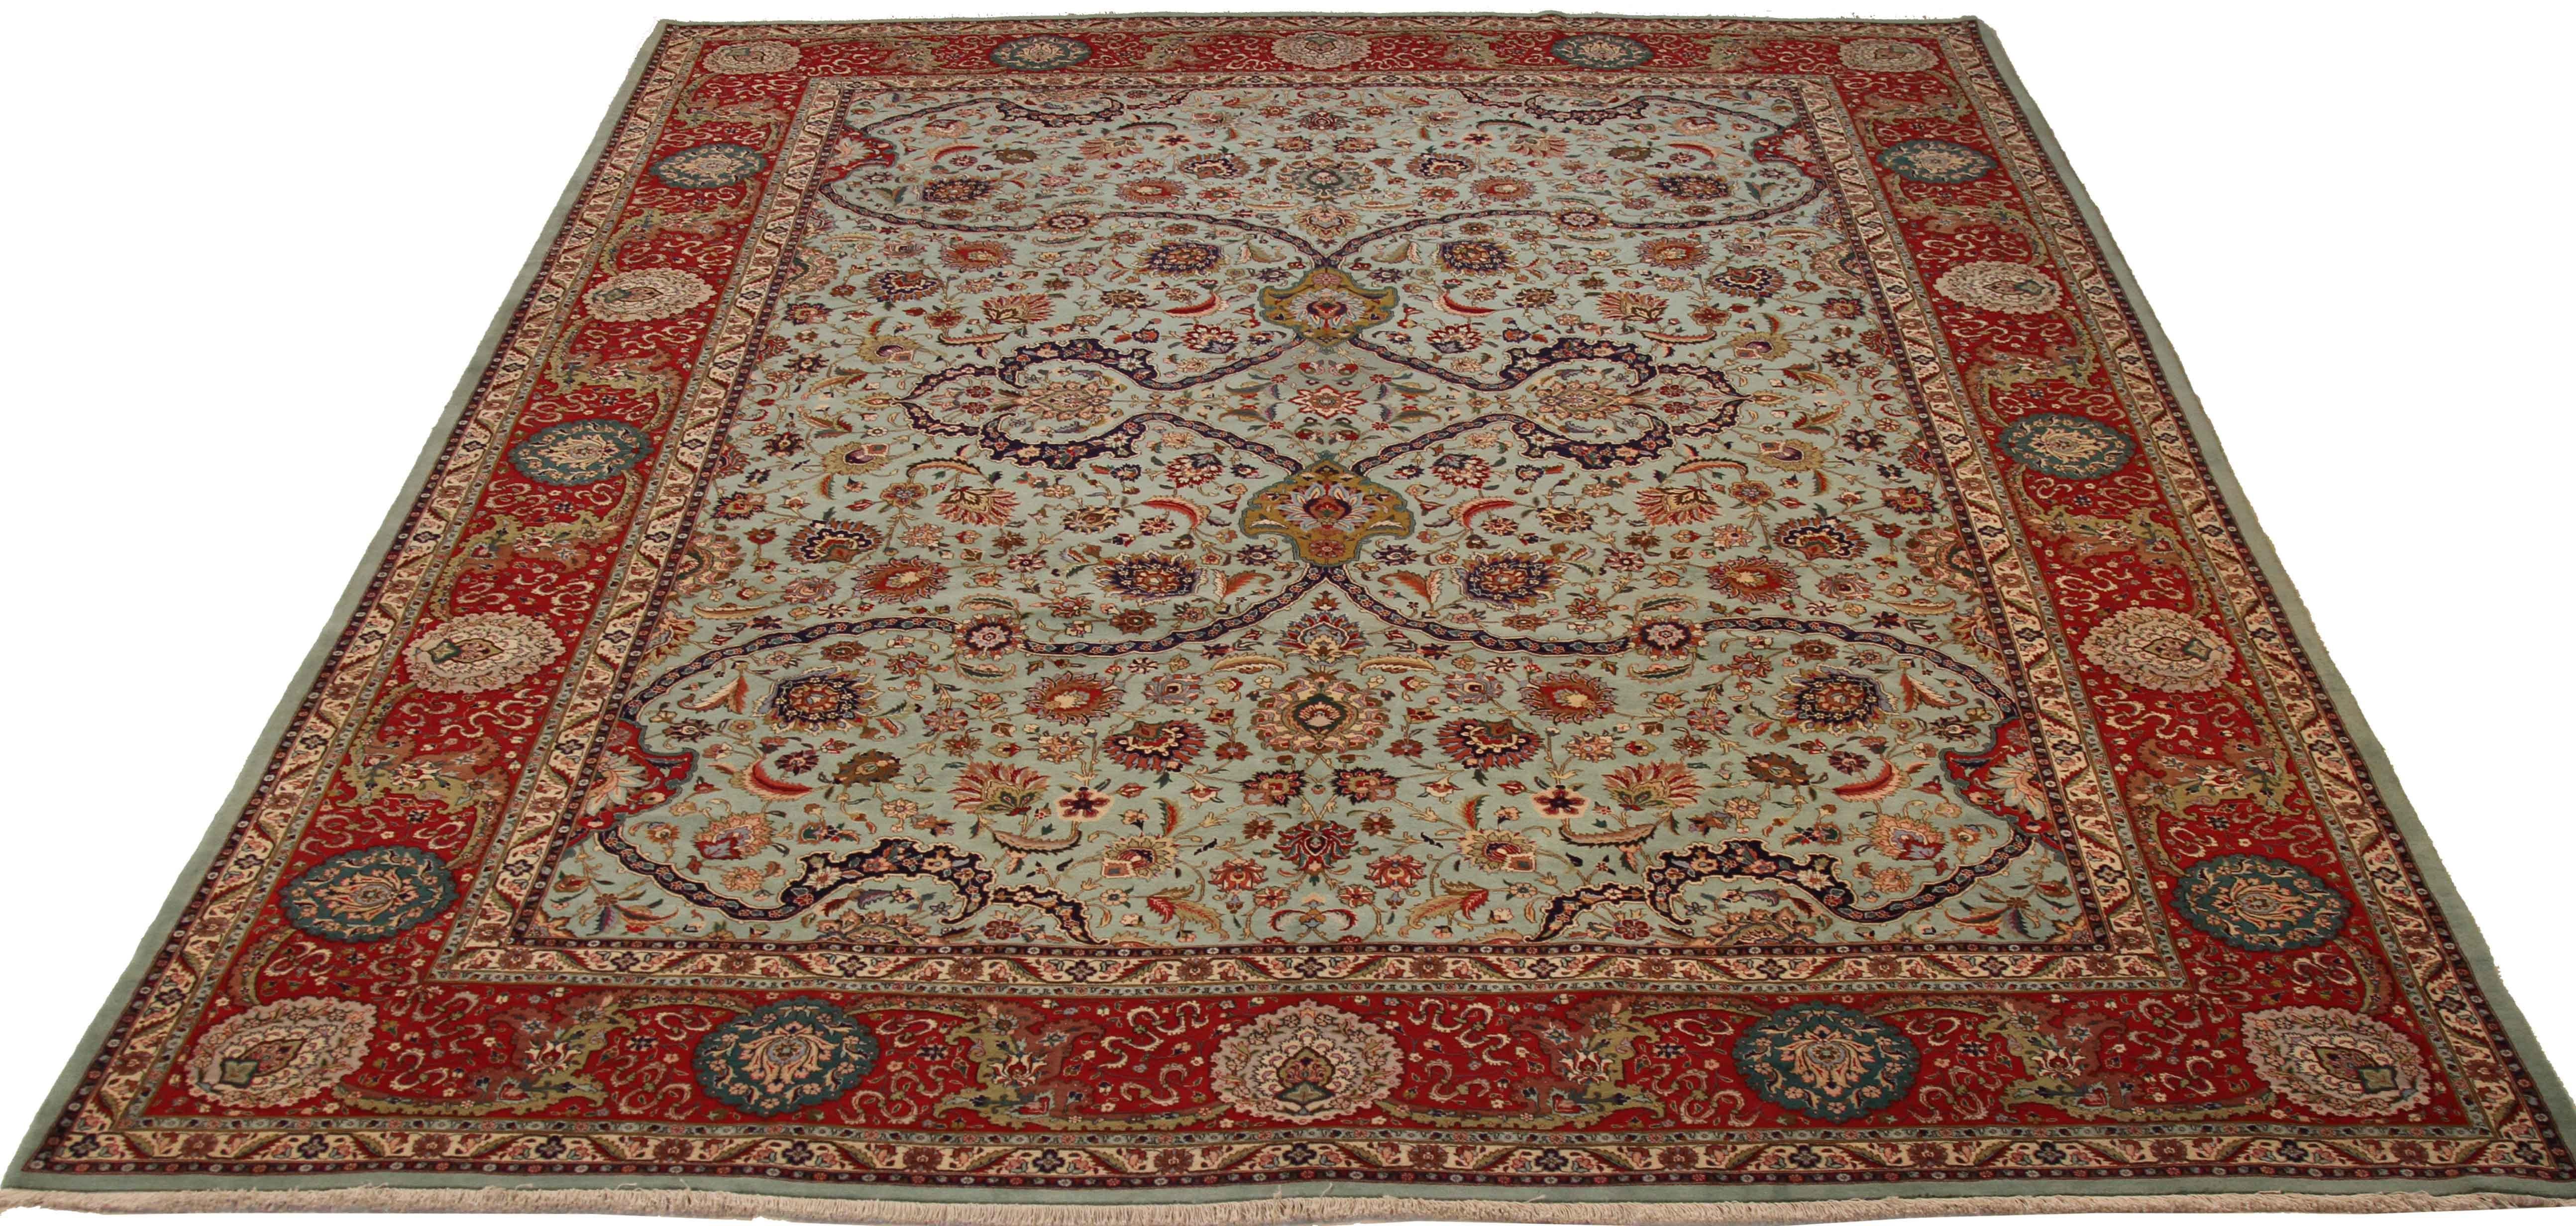 Hand-Knotted 1970s Antique Tabriz Persian Rug with a Grand Blue and Red Floral Design For Sale